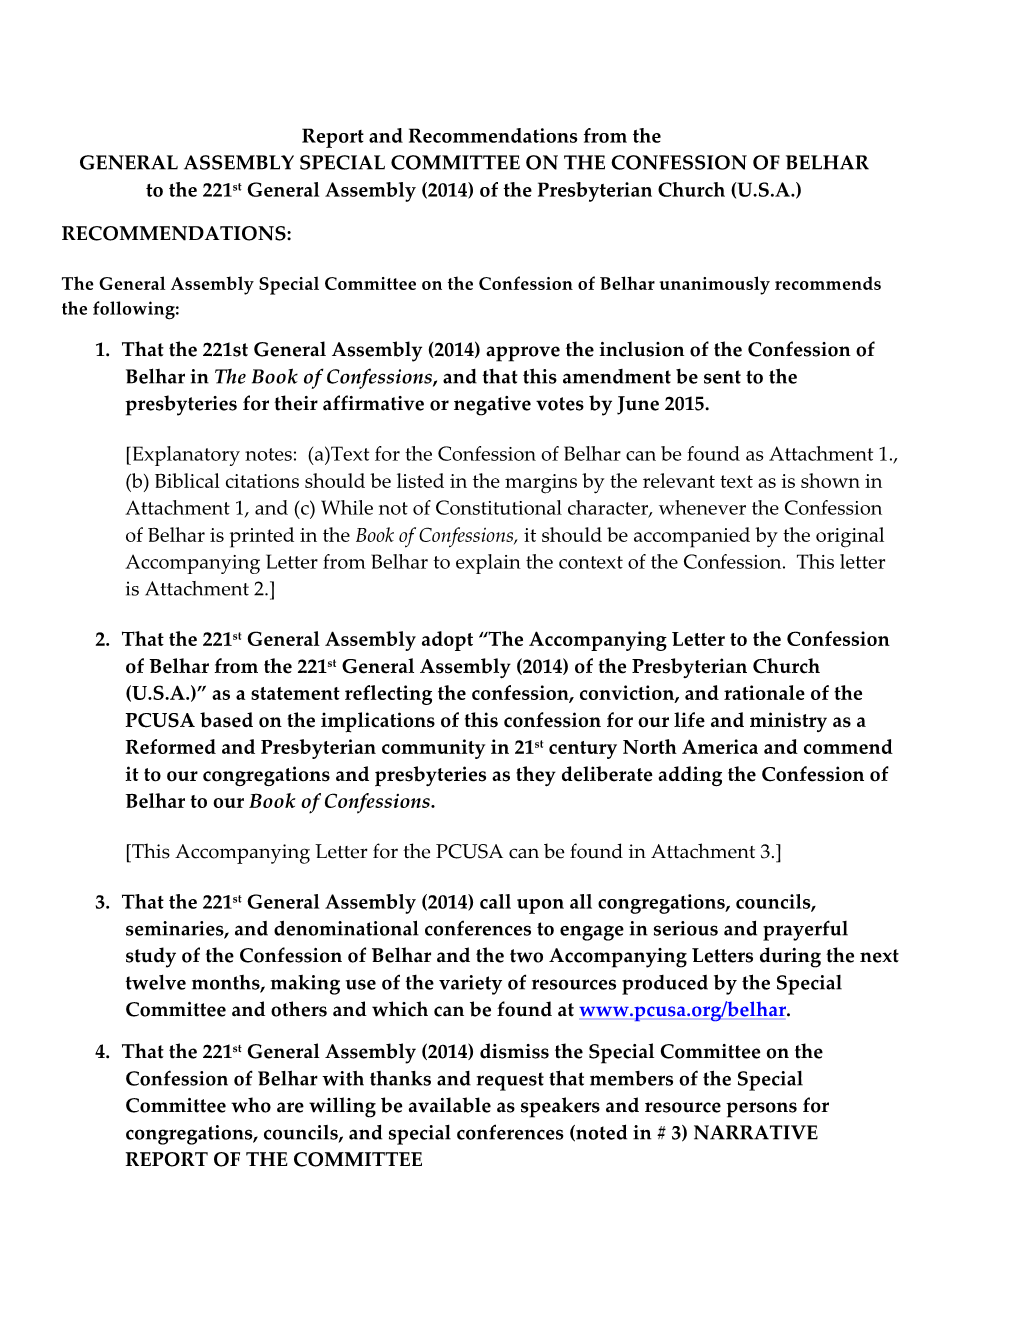 Report and Recommendations from the GENERAL ASSEMBLY